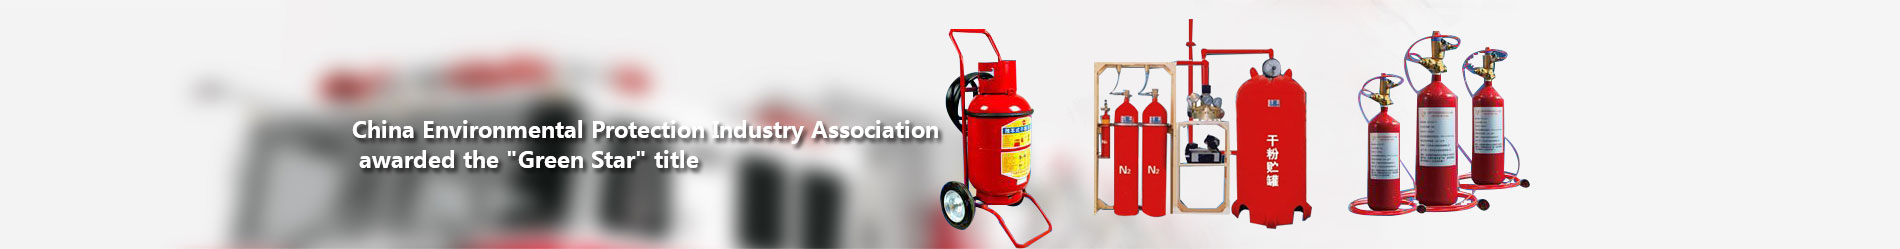 Fire accessories |Product display 